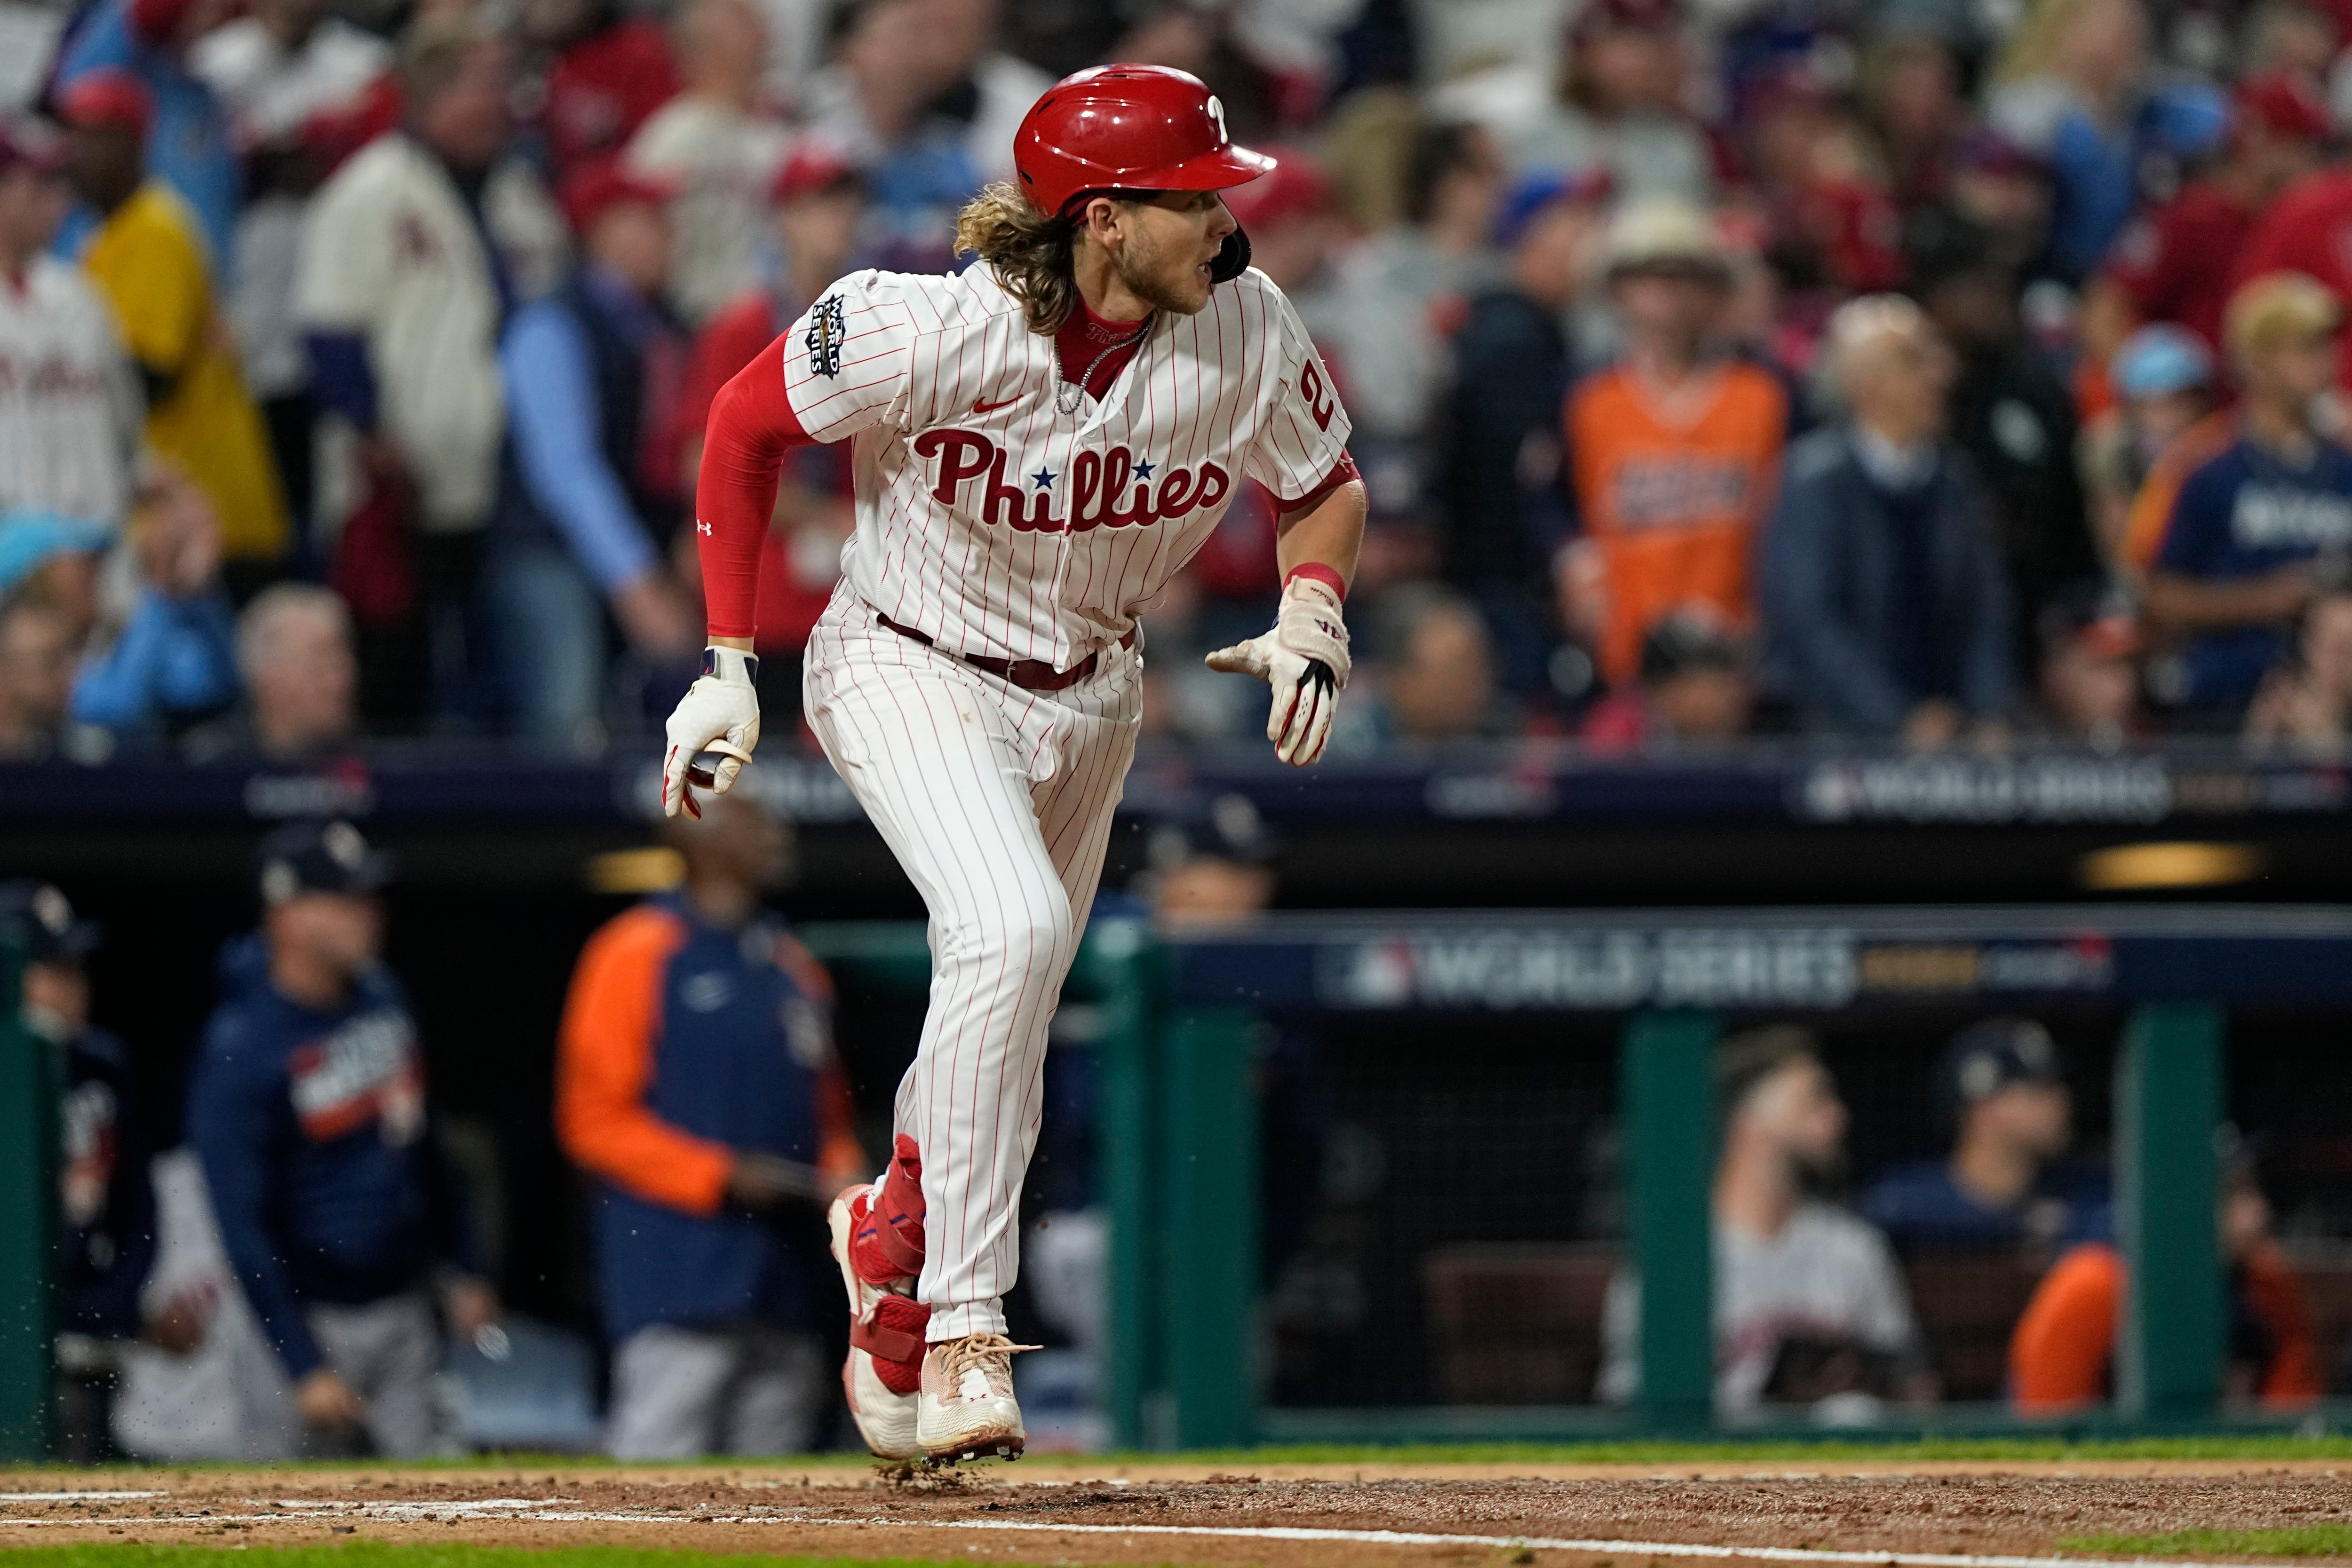 2022 World Series teed up: Bryce Harper, Phillies to face Astros